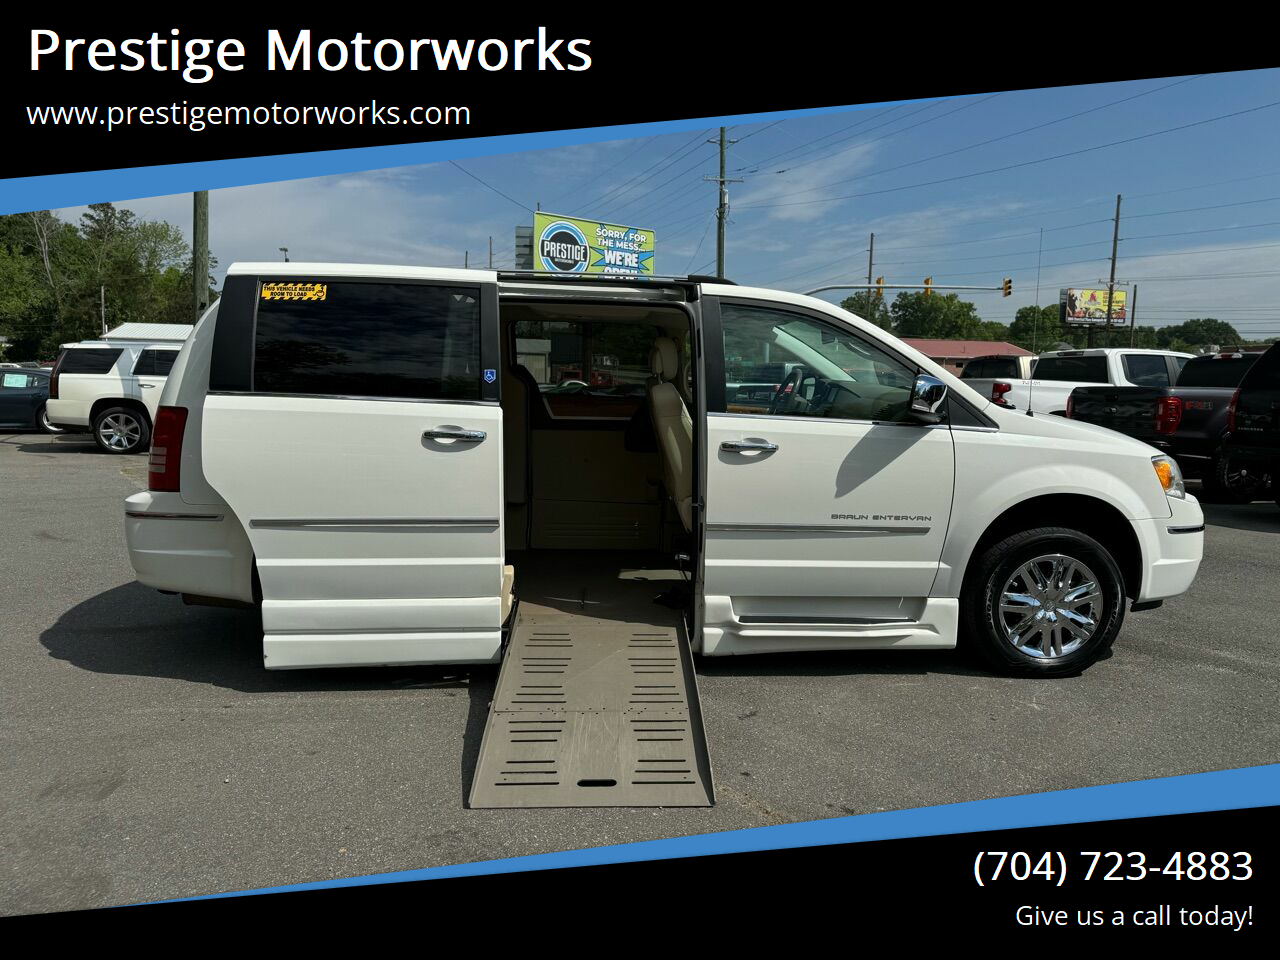 2010 Chrysler Town & Country 2010.5 Limited FWD